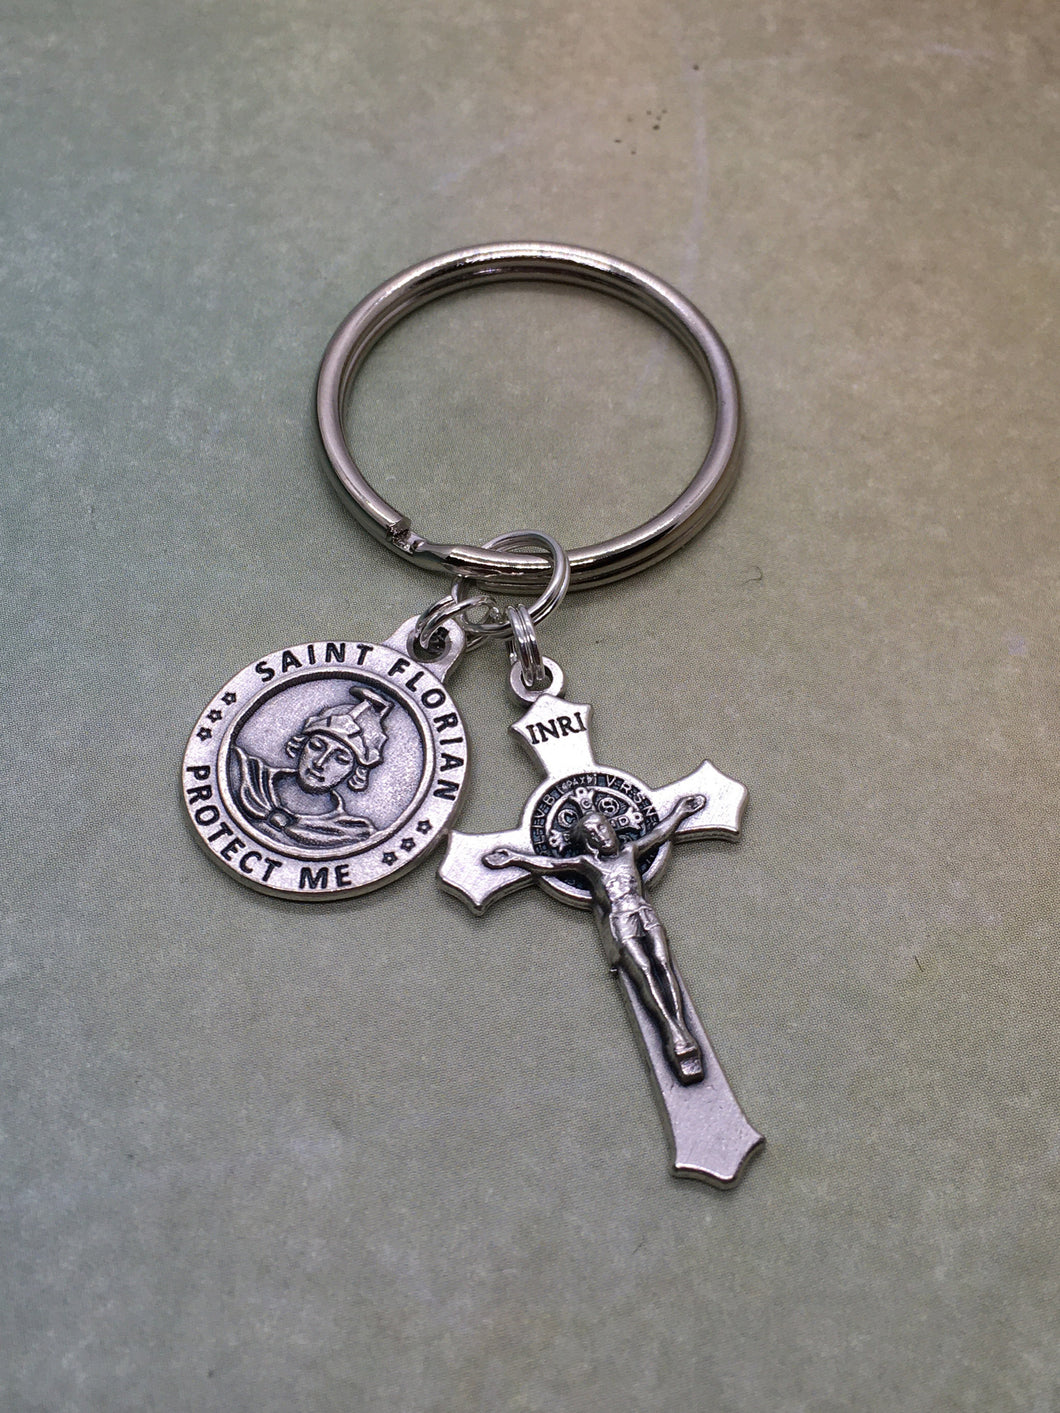 St. Florian fire fighter key ring